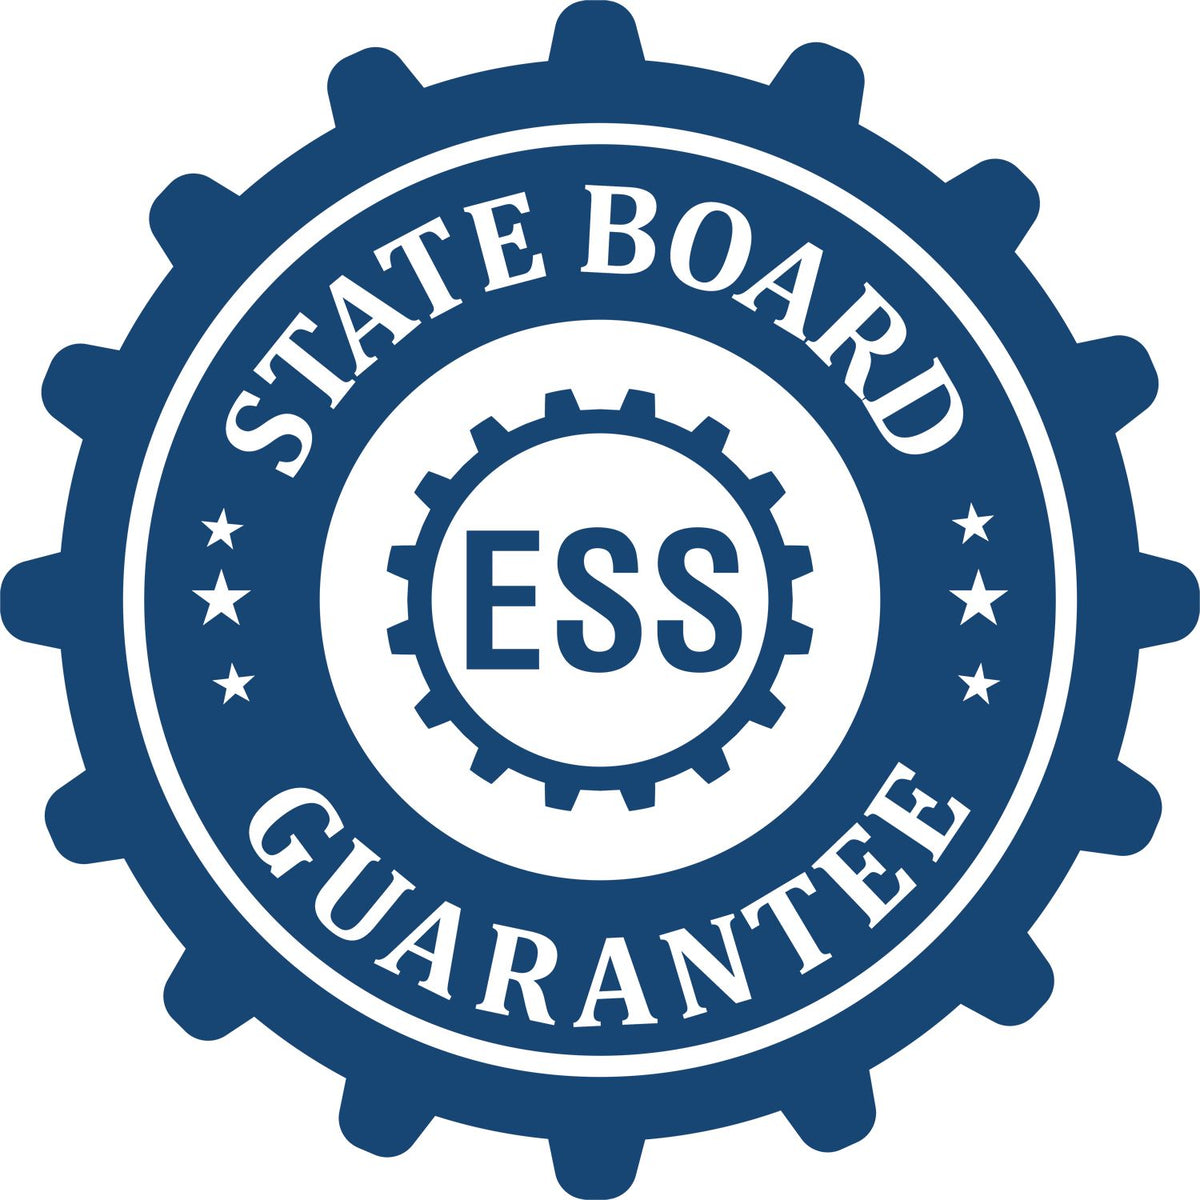 An emblem in a gear shape illustrating a state board guarantee for the Premium MaxLight Pre-Inked Missouri Landscape Architectural Stamp product.